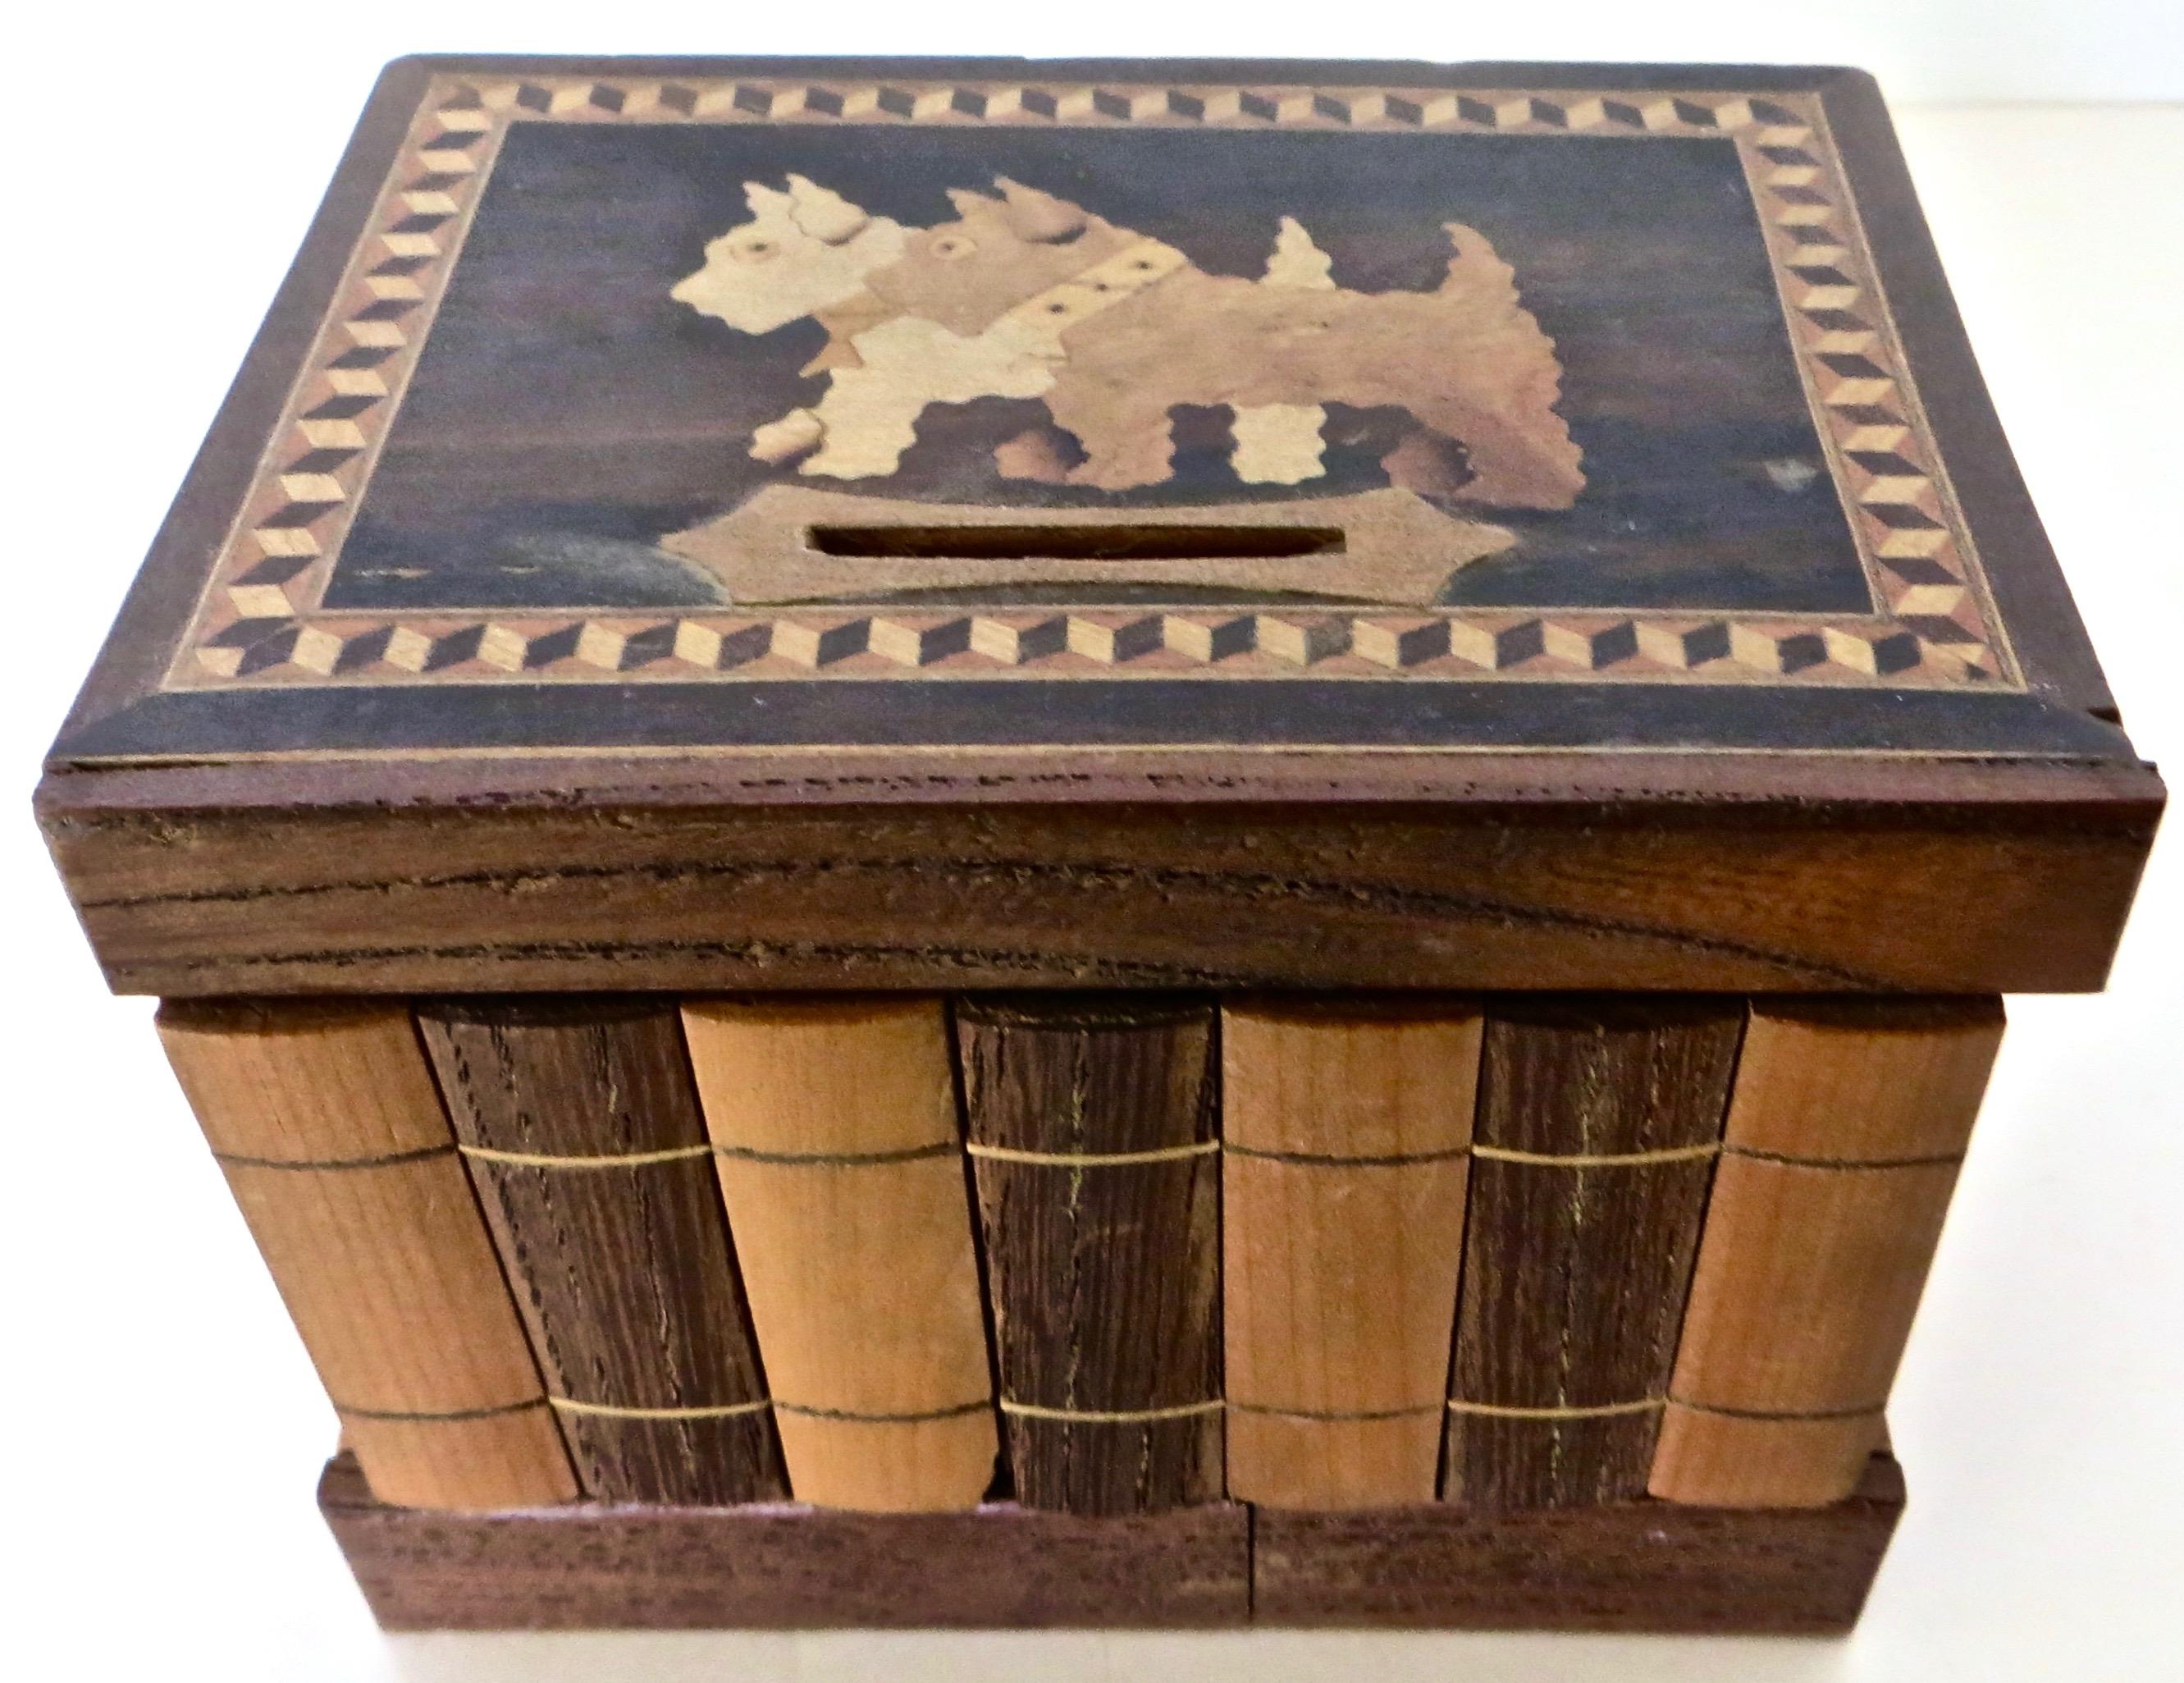 Quite an unusual piece for bank collectors or just for those seeking a unique collectible. This is a coin bank made of all wood; walnut and inlay here and there; simulating a stack and shelf of books; a pair of 